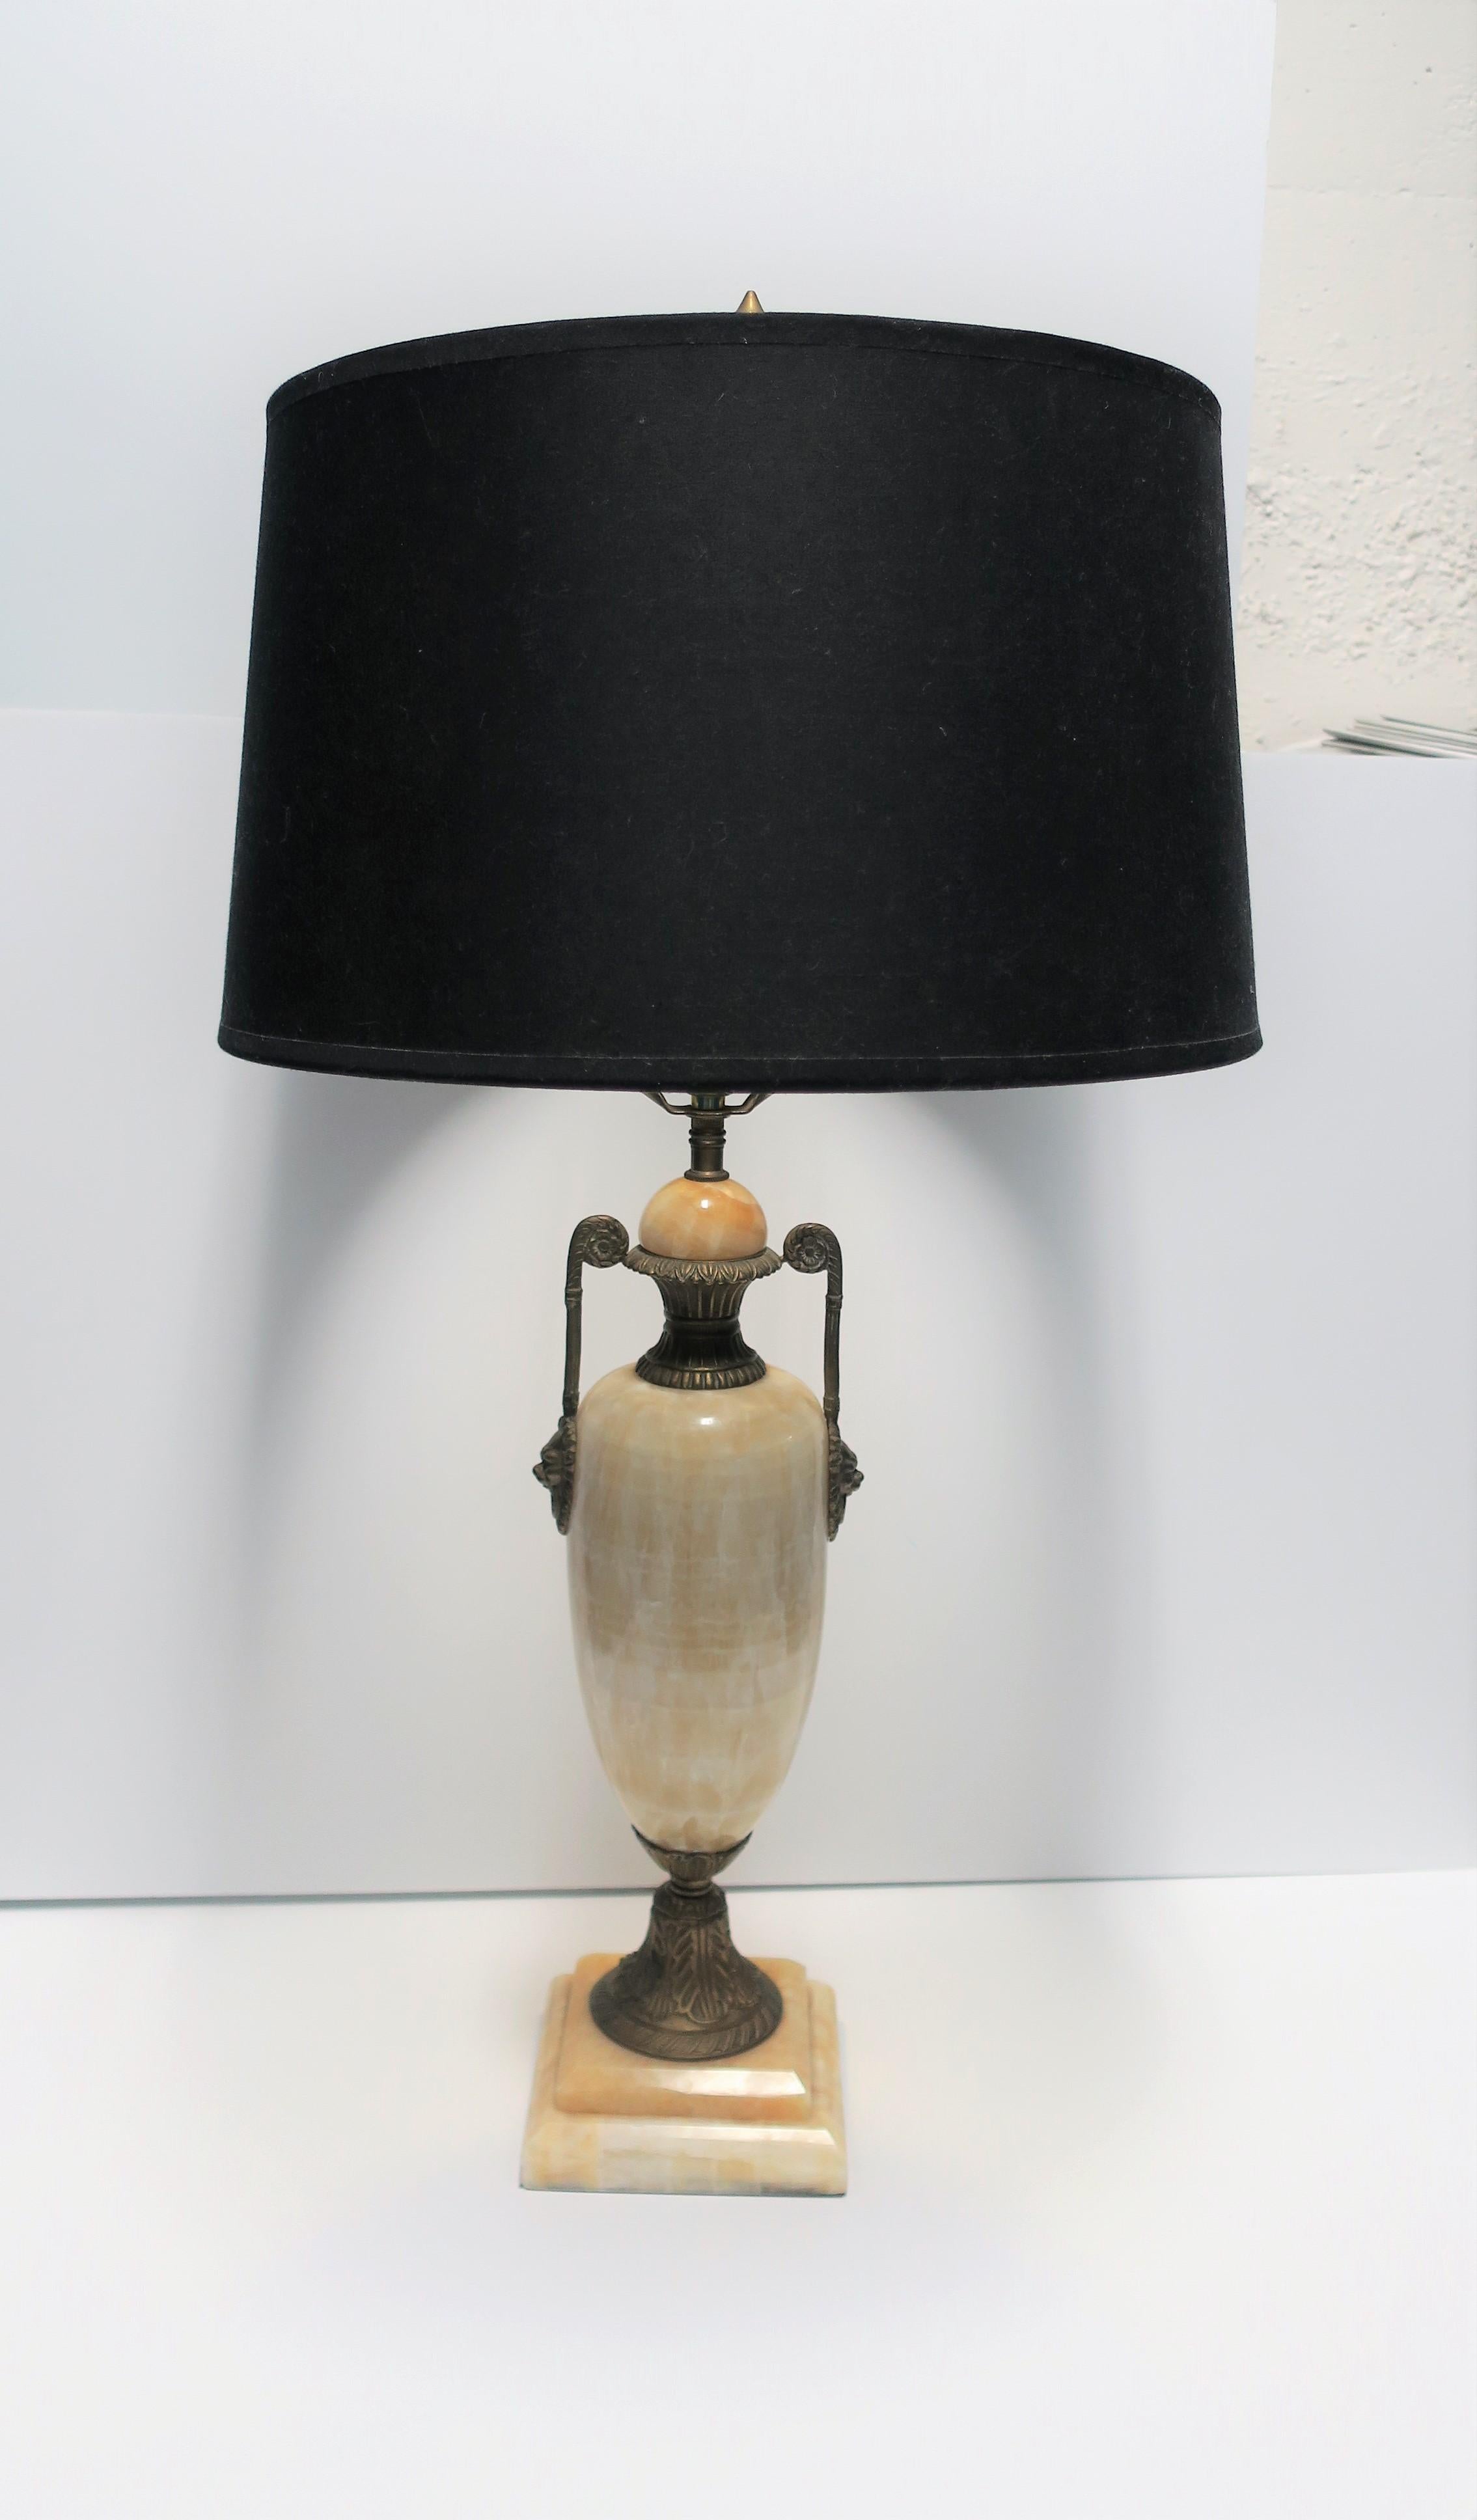 A substantial solid beige or sand colored onyx marble and brass urn form desk or table lamp with lion-head detail in the Regency style, circa late-20th century. Lamp includes original brass finial. 

Measurements:
Base: 5.5